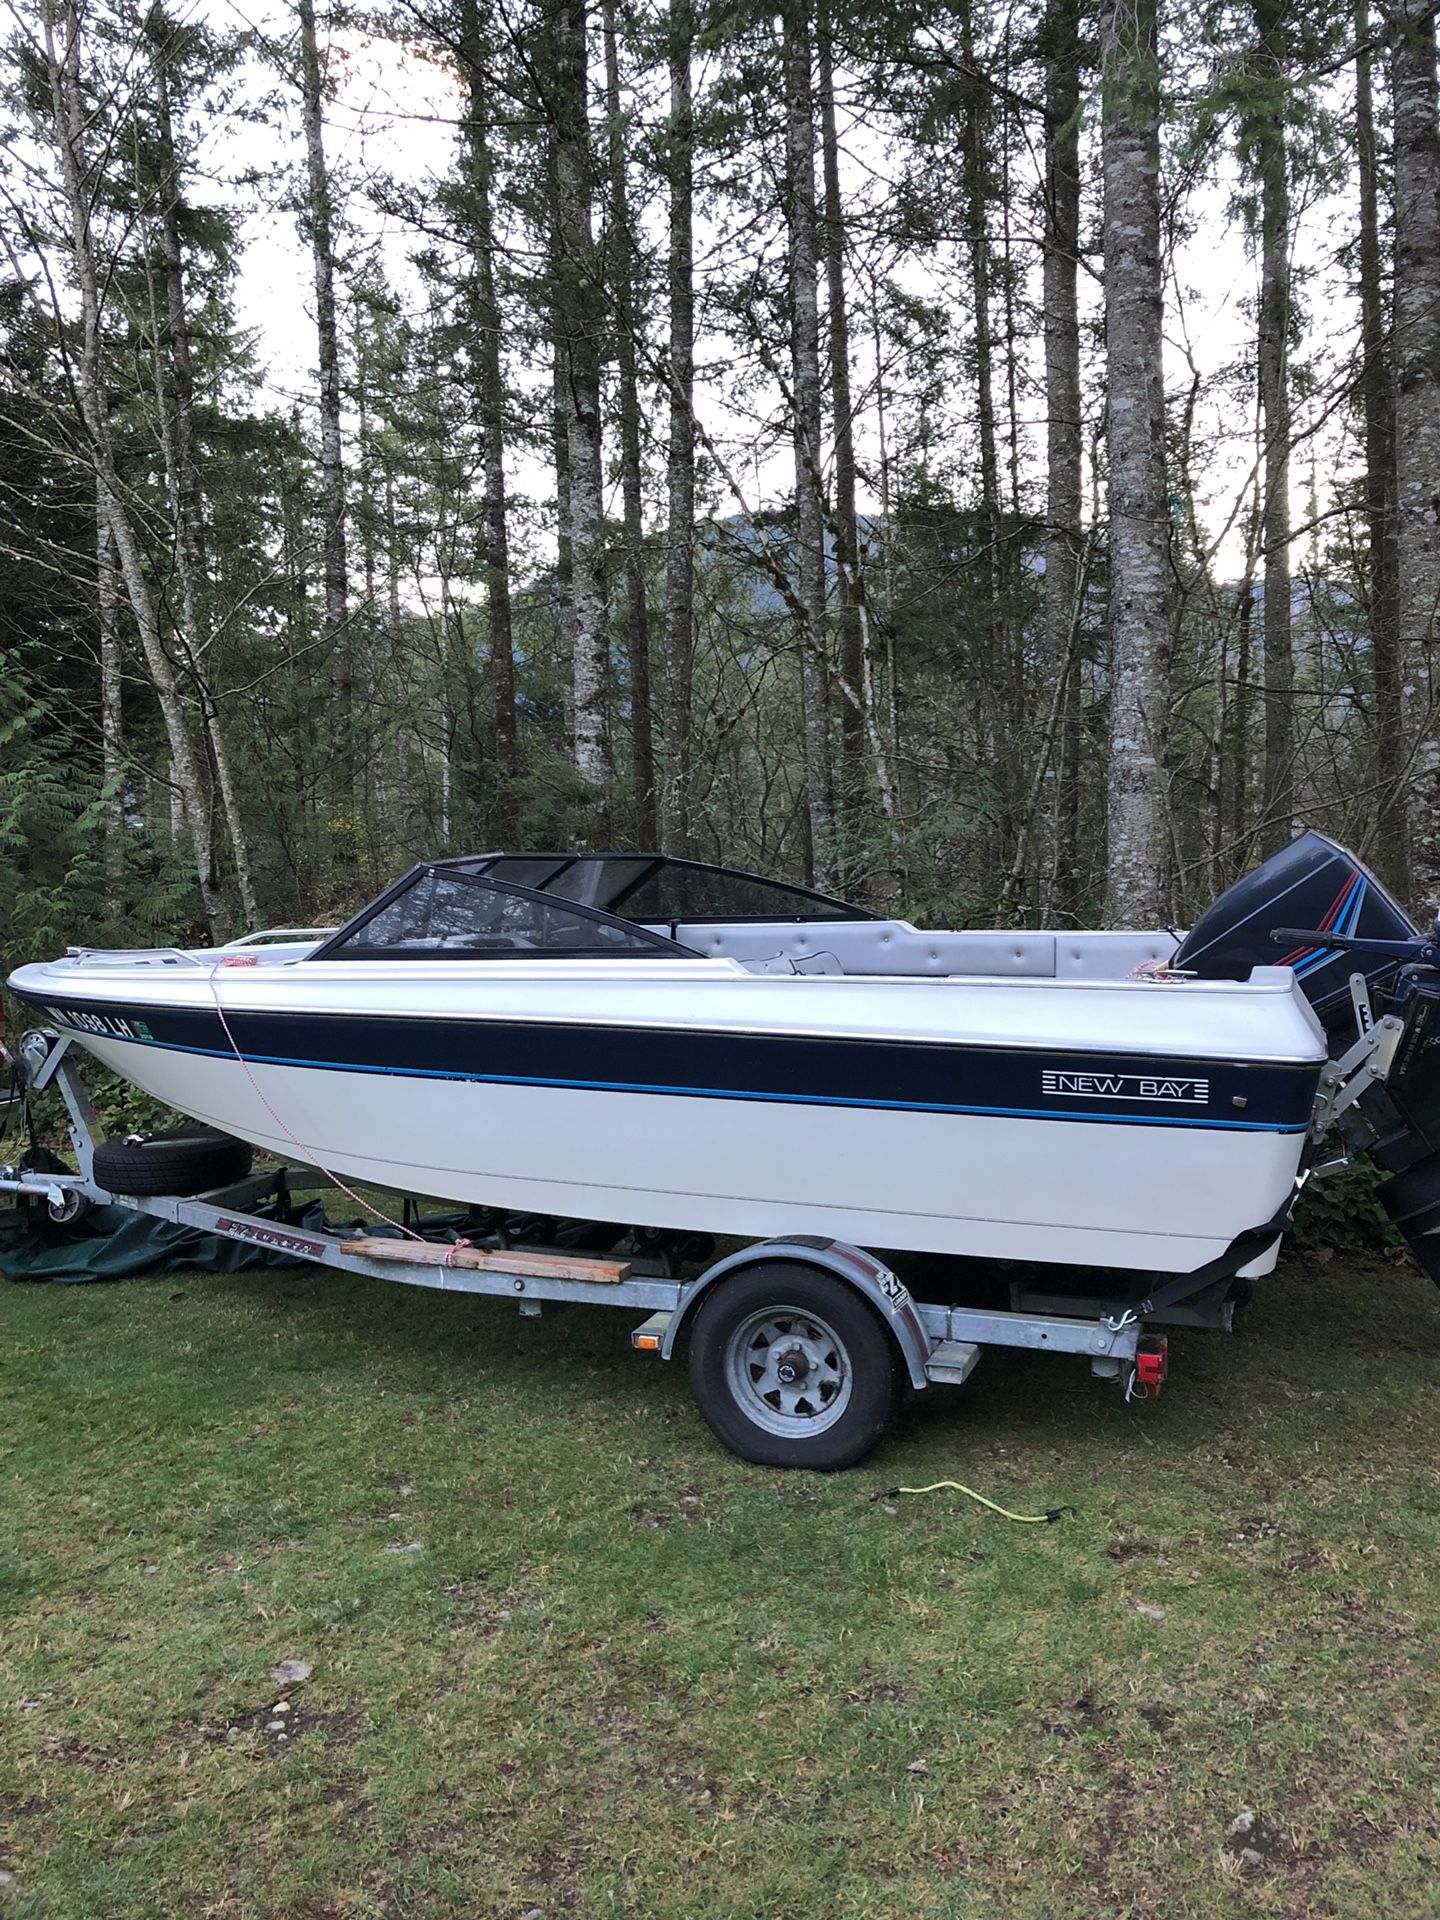 Sale 1989 17’ NewBay open bow runabout